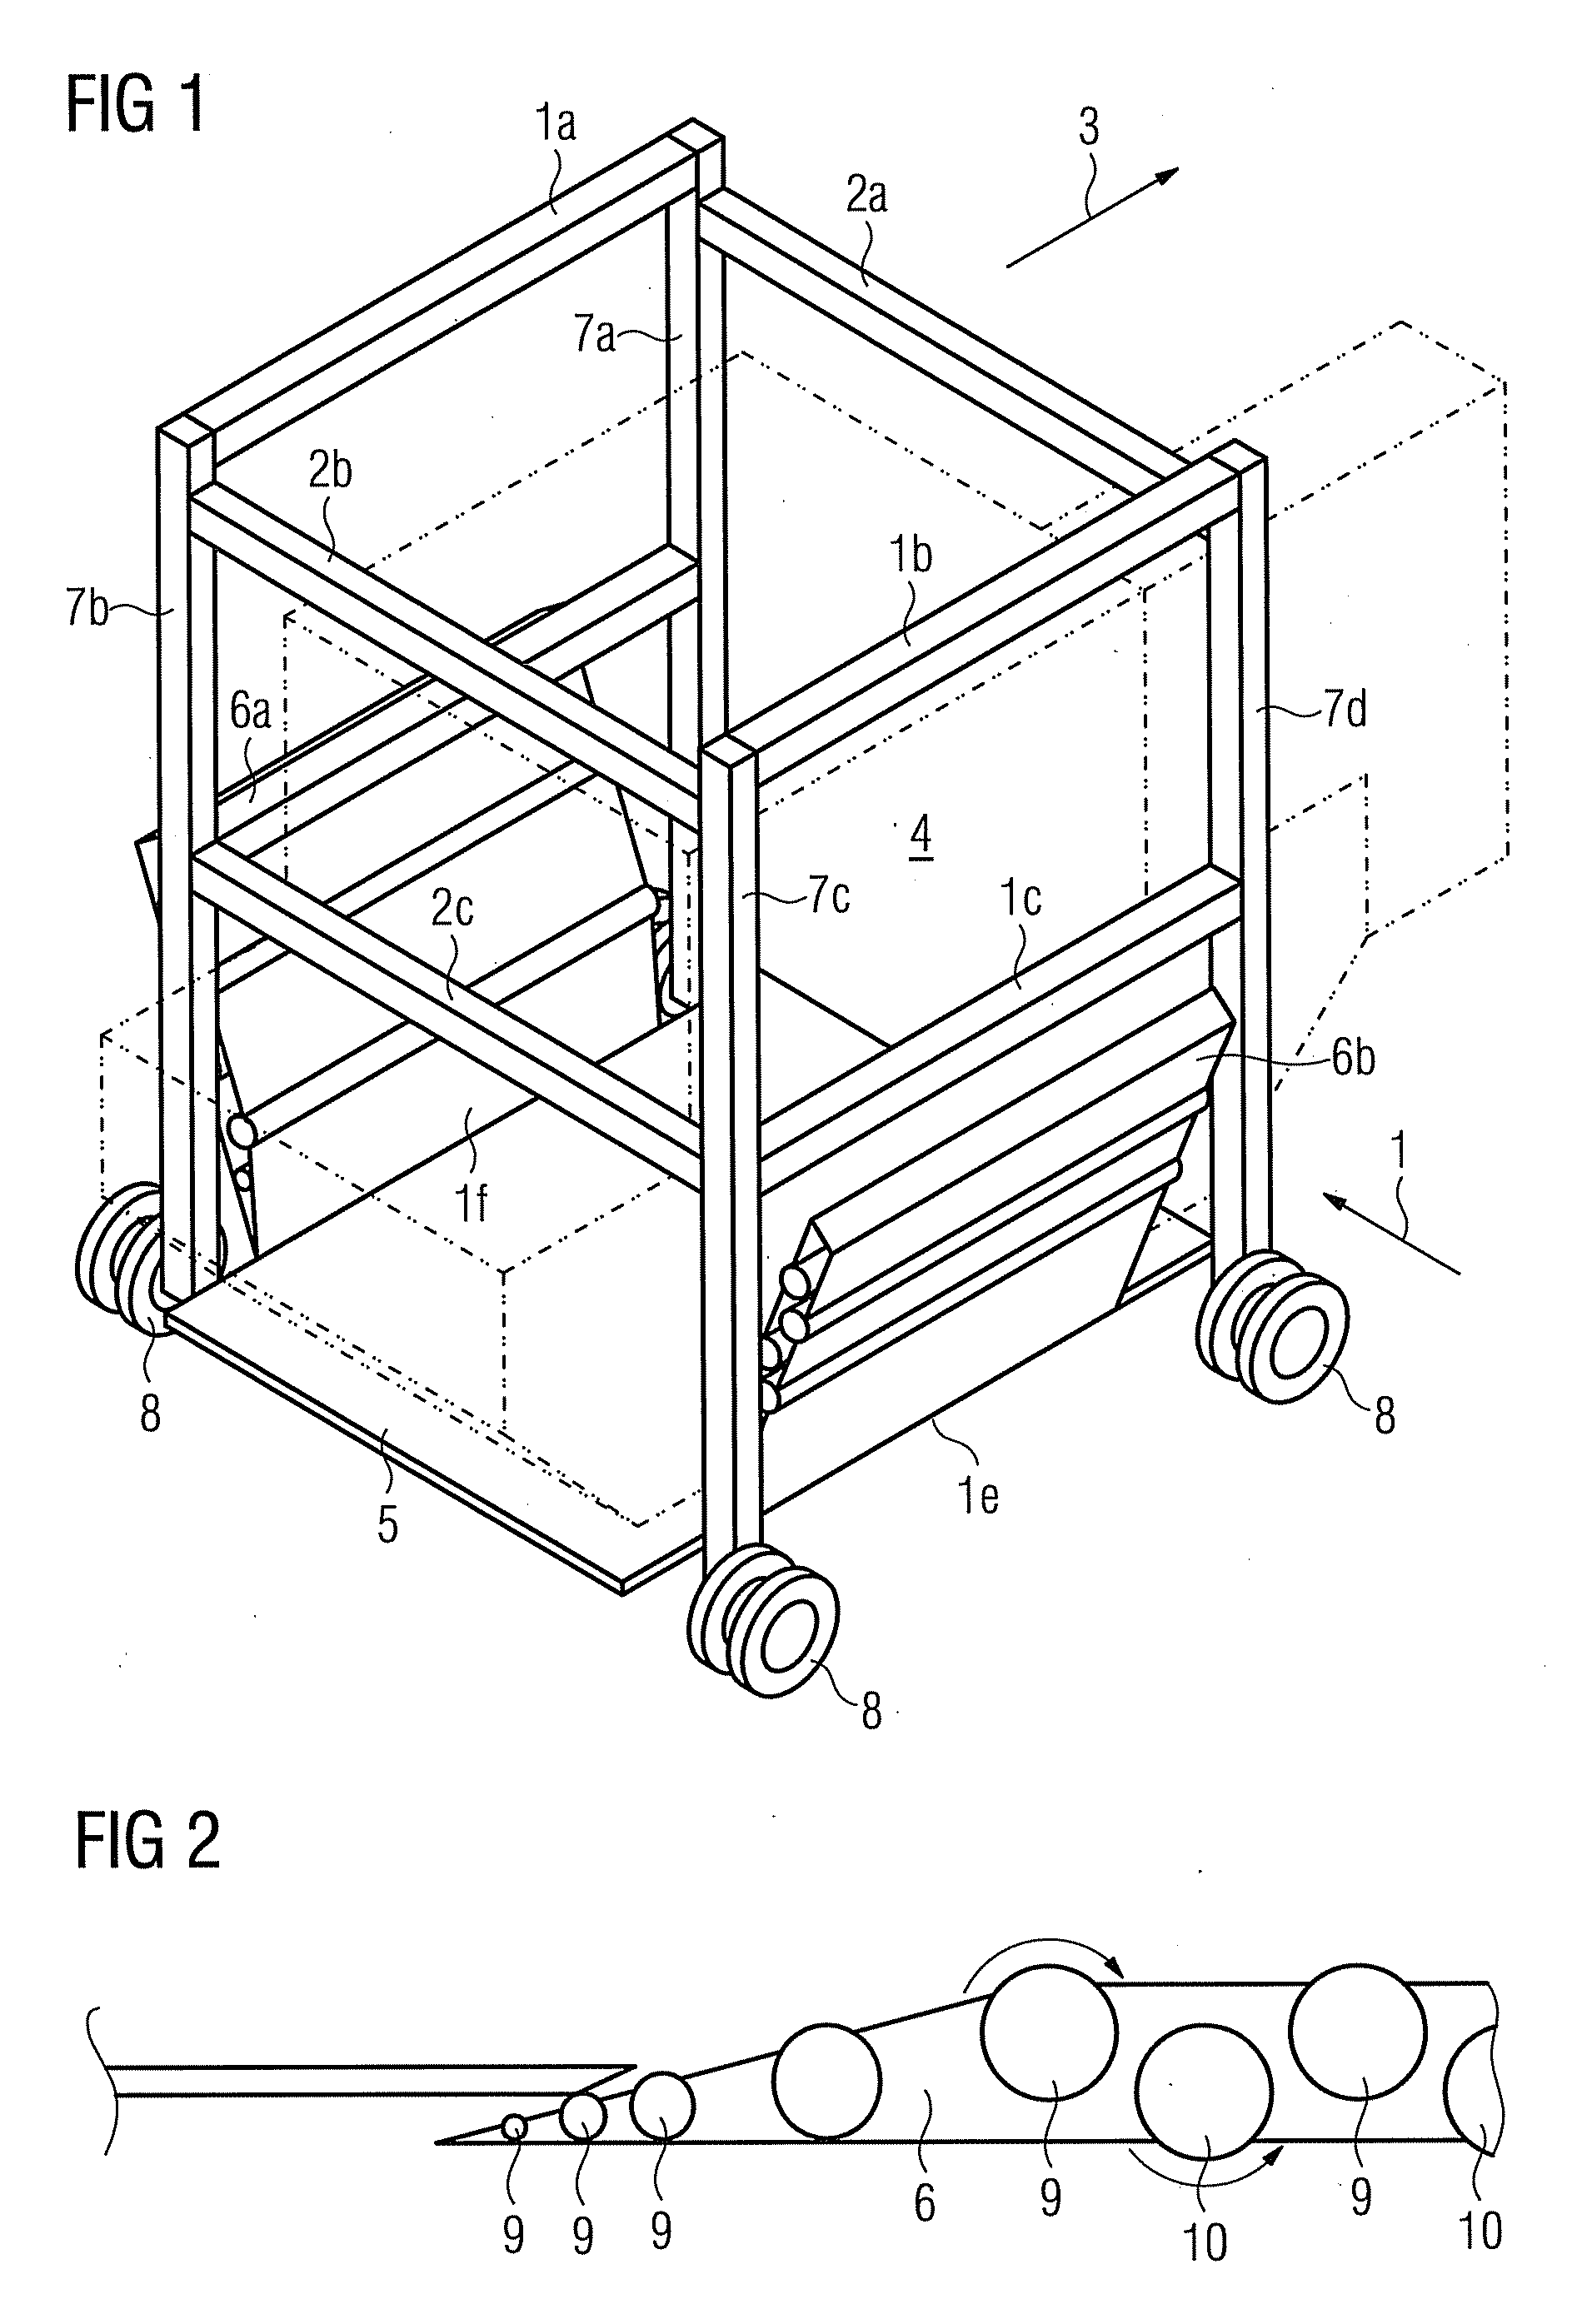 Transport vehicle for raising and transporting ULDs and cargo pallets